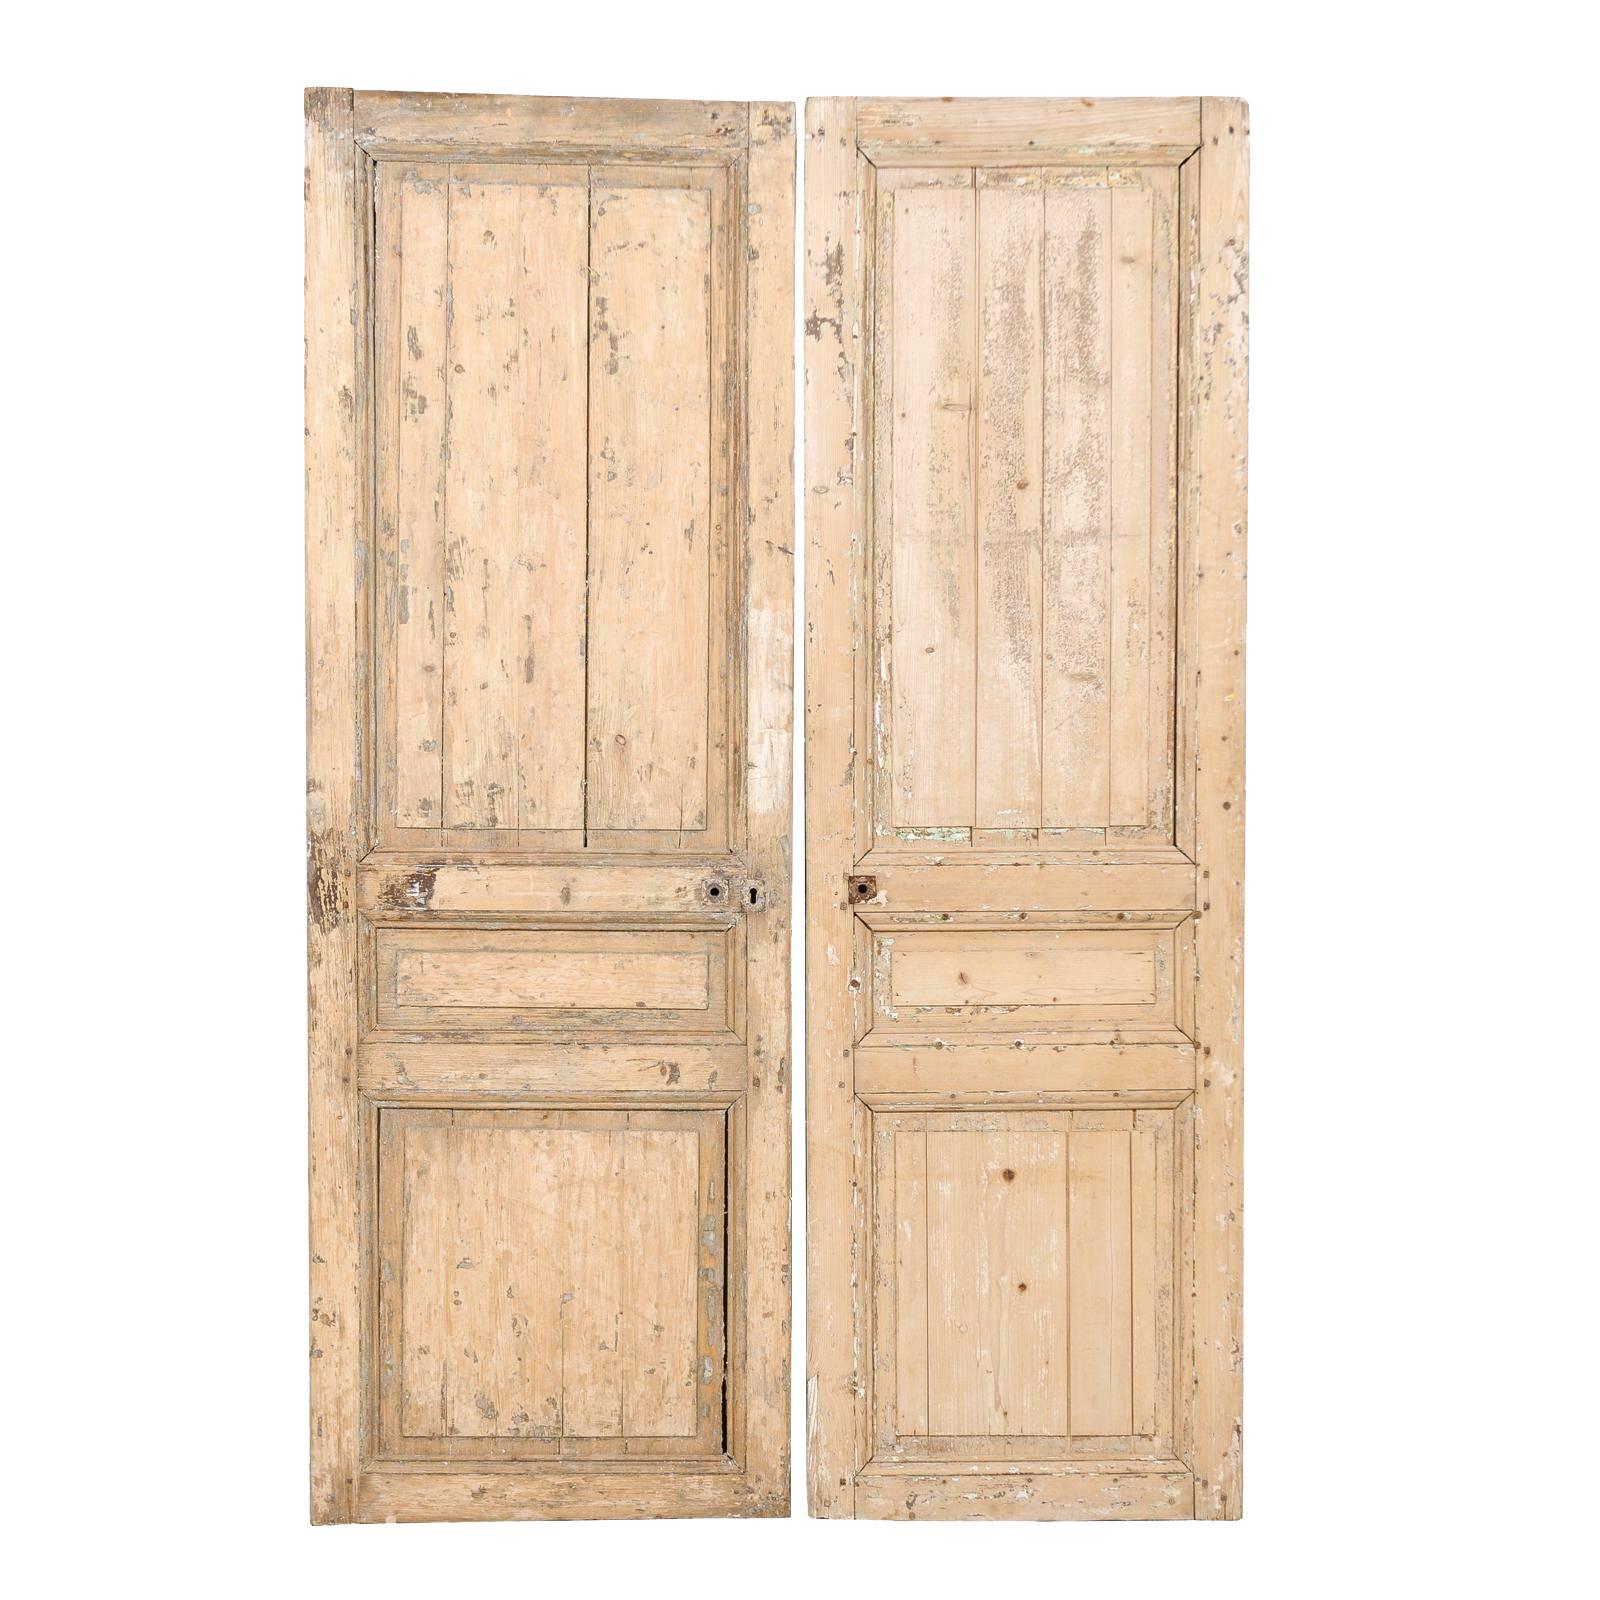 Pair of 19th Century French Wooden Doors